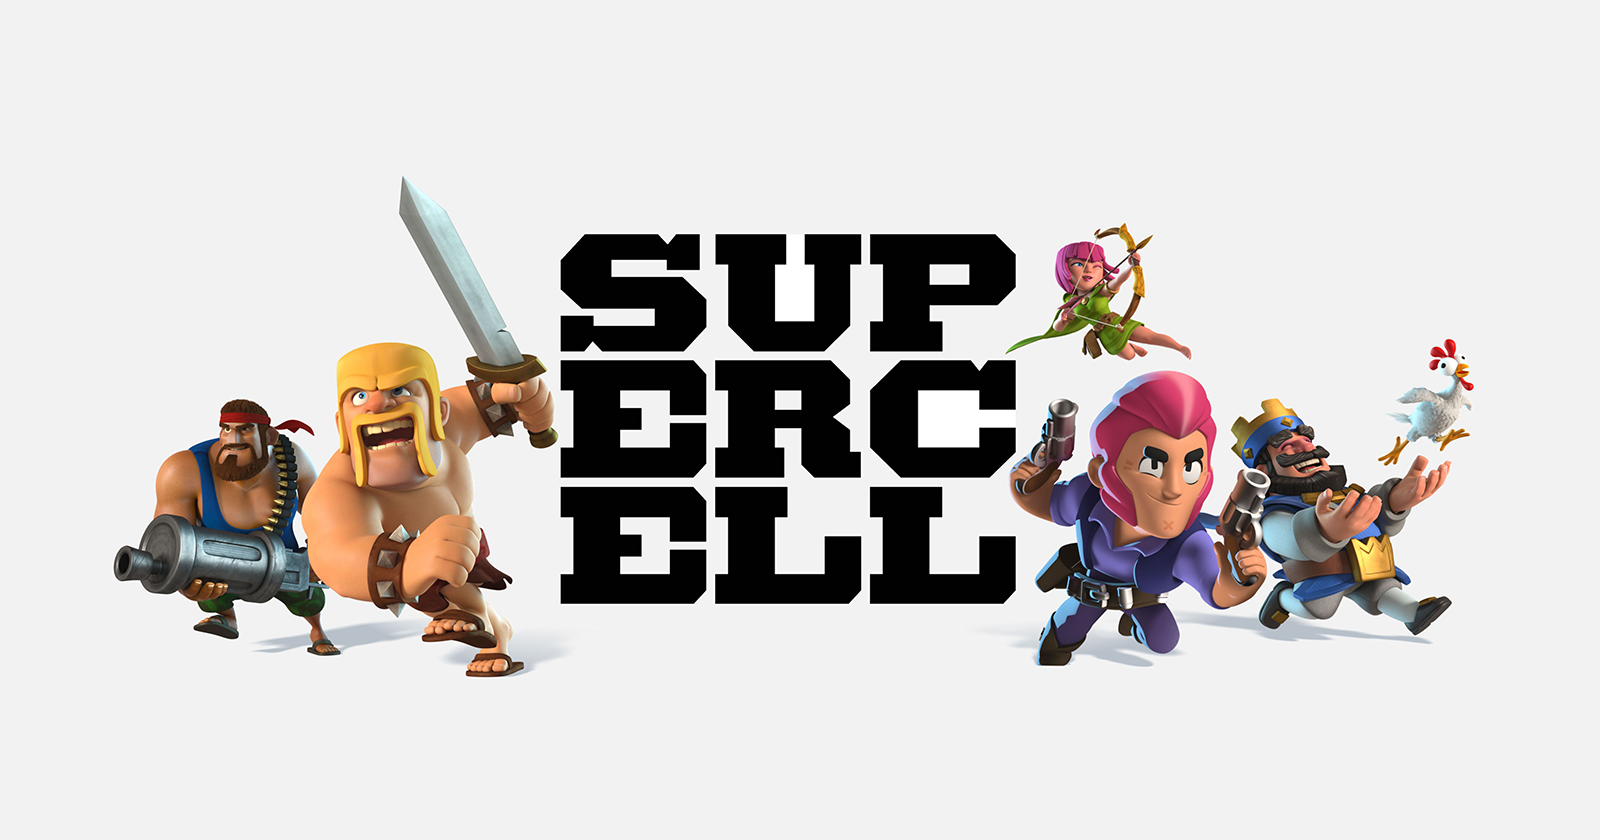 Supercell игры. Игры Supercell ID. Суперселл Креаторс. Логотип компании Supercell. Supercell's clash of clans